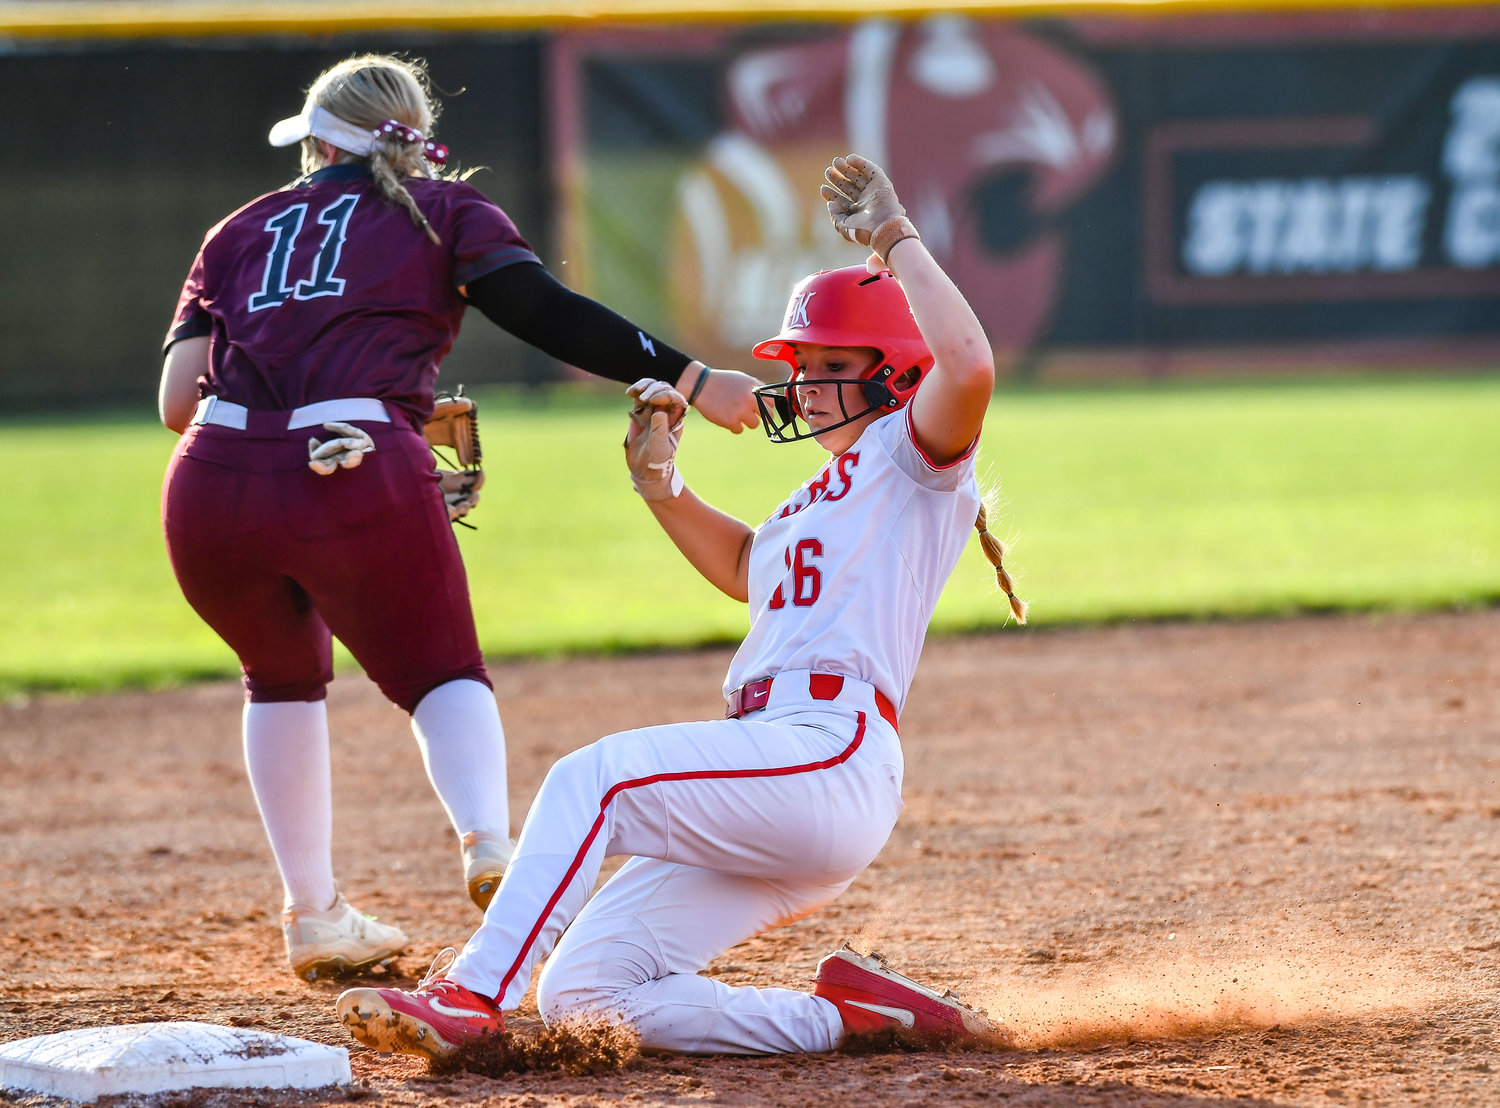 May 13, 2022: Katy's Hailey Gore #16 slides safely into third base during the Regional Quarterfinal playoff between Katy and Cinco Ranch at Katy HS. (Photo by Mark Goodman / Katy Times)